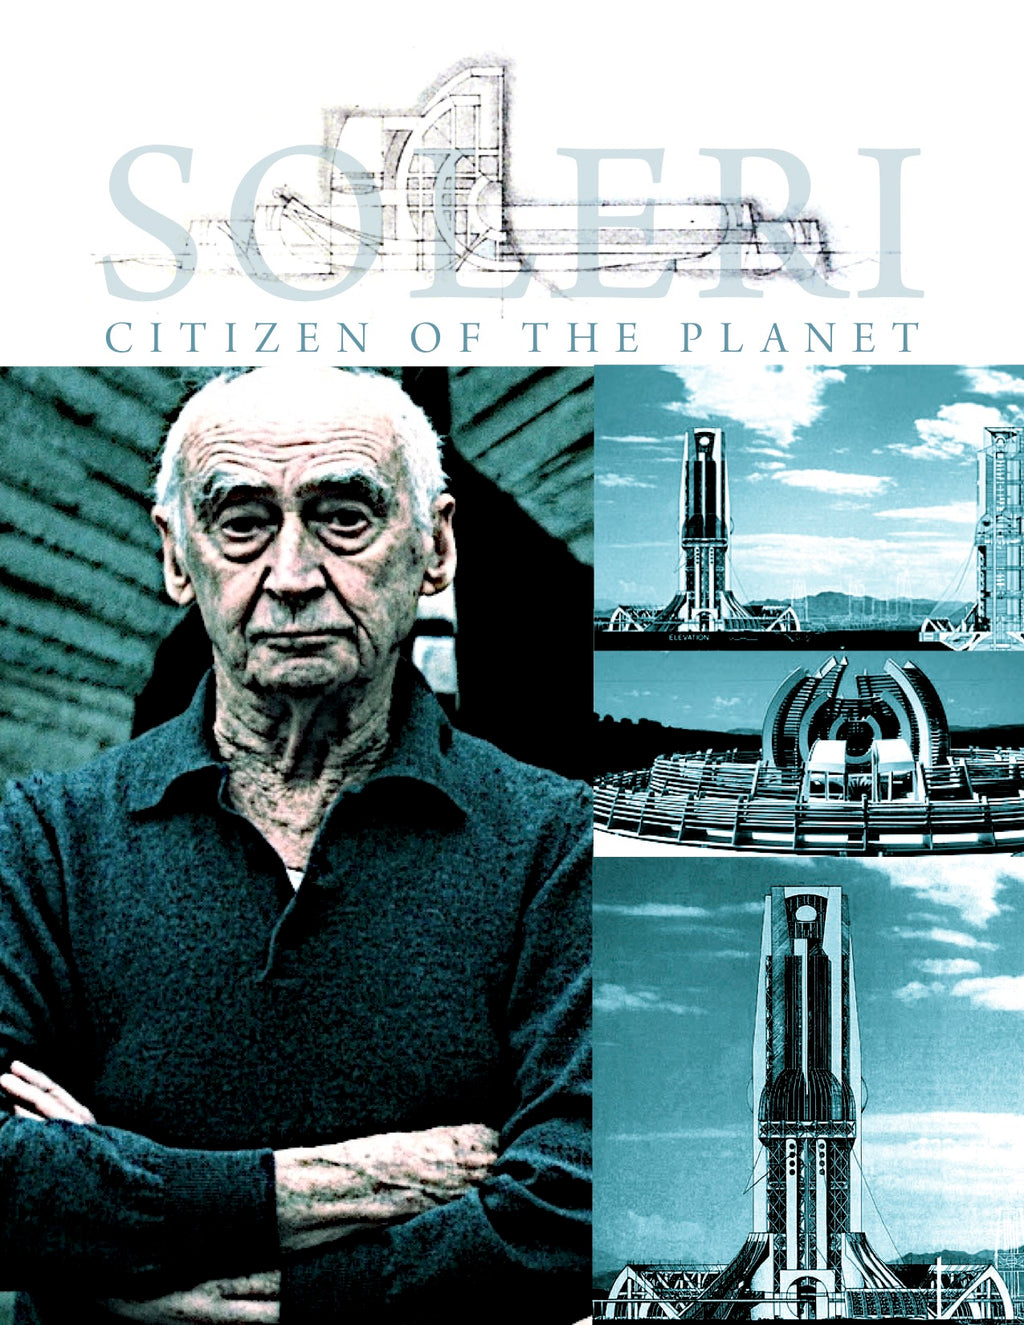 Paolo Soleri: Citizen of the Planet